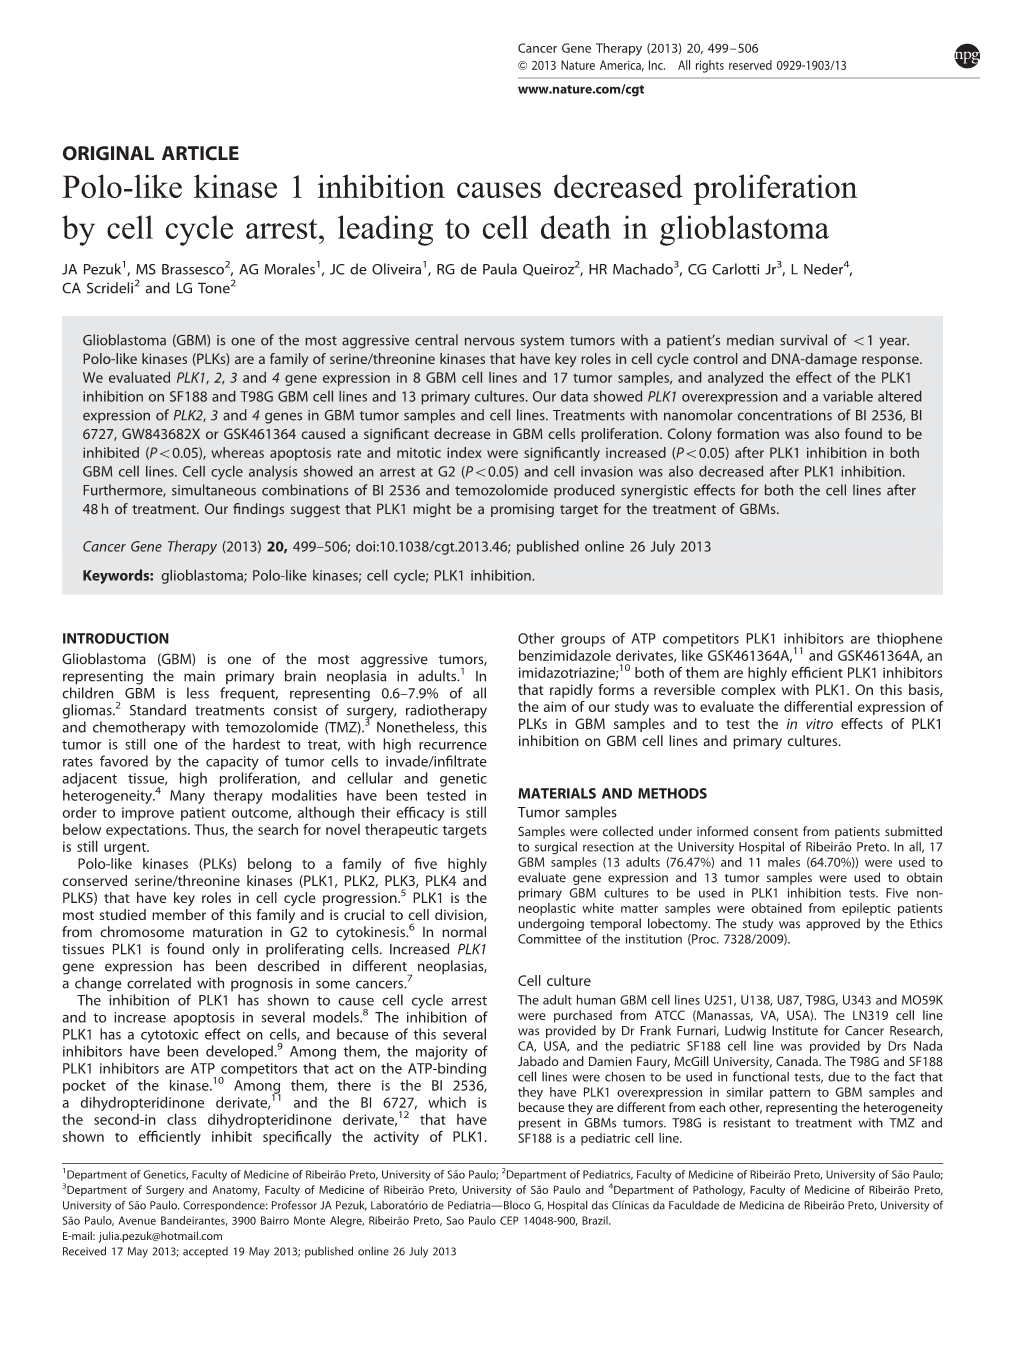 Polo-Like Kinase 1 Inhibition Causes Decreased Proliferation by Cell Cycle Arrest, Leading to Cell Death in Glioblastoma